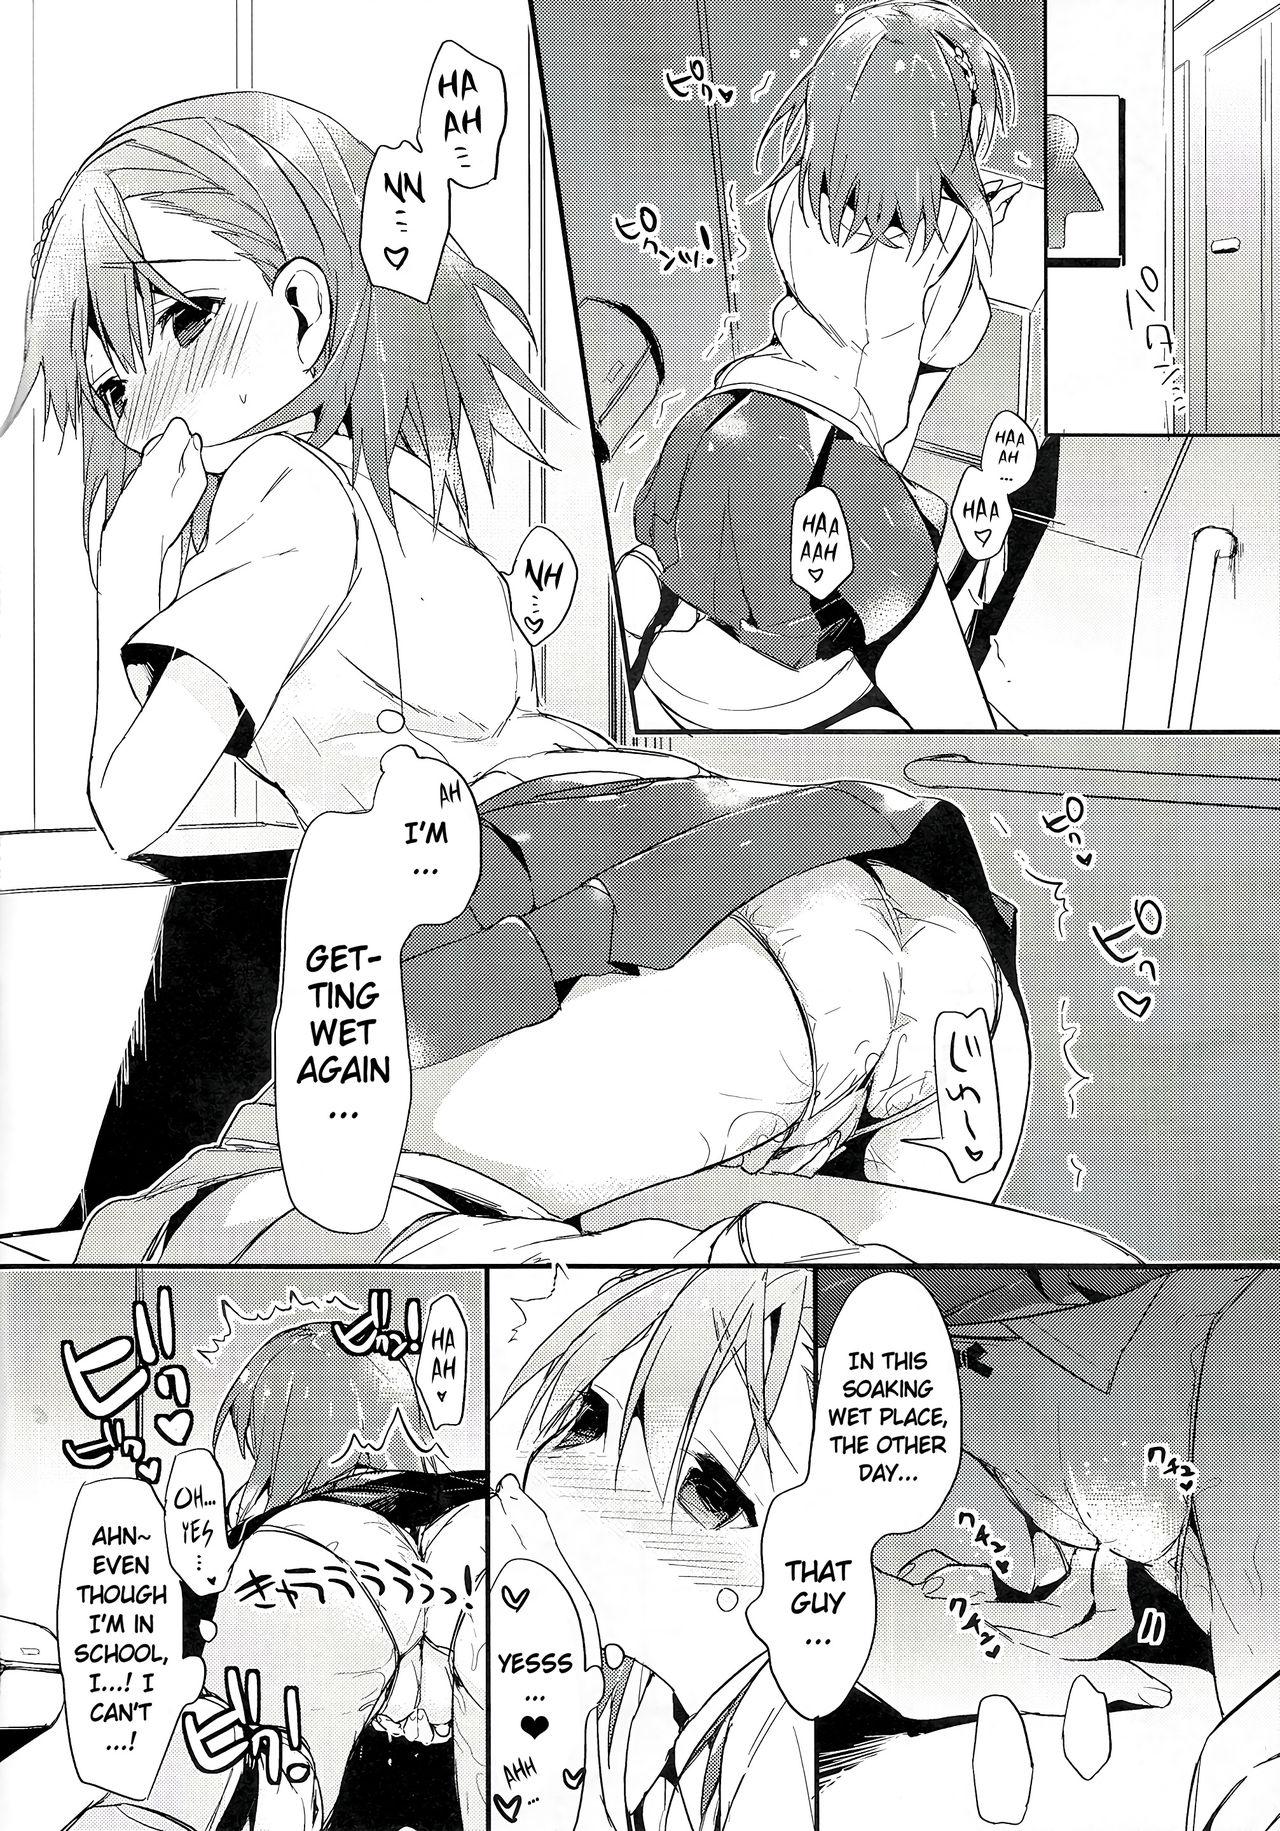 Sesso Mikoto to. 5 | With Mikoto. 5 - Toaru majutsu no index | a certain magical index Made - Page 6